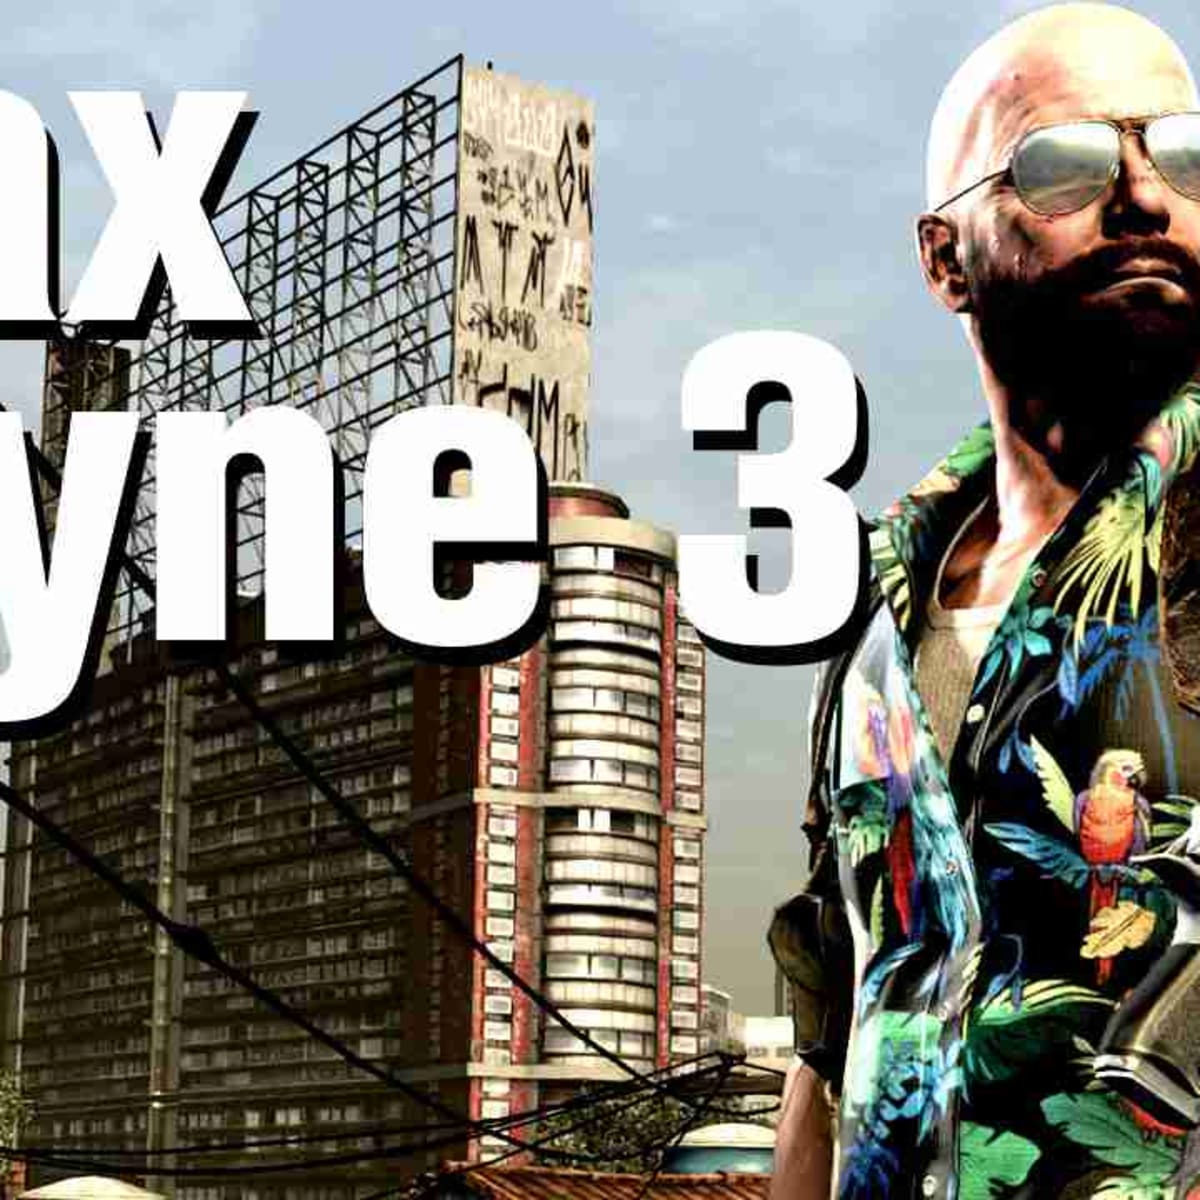 Max Payne 3 - Part 5 - WELCOME TO PANAMA 